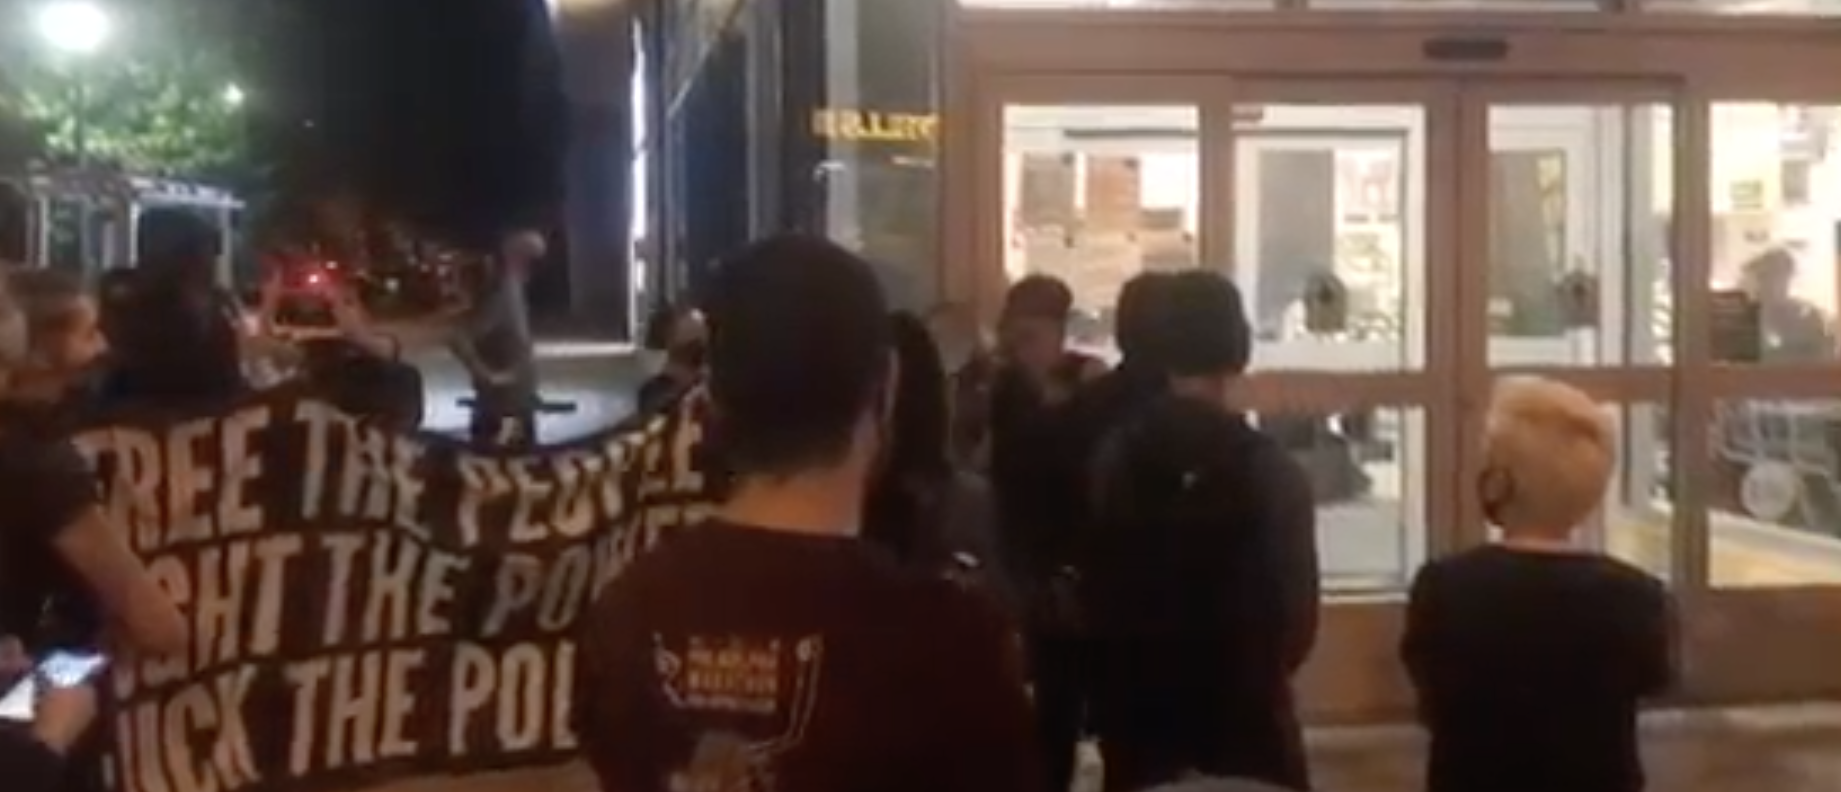 Protesters In DC Claim Whole Foods Is Racist, Call For It To Be Shut ...